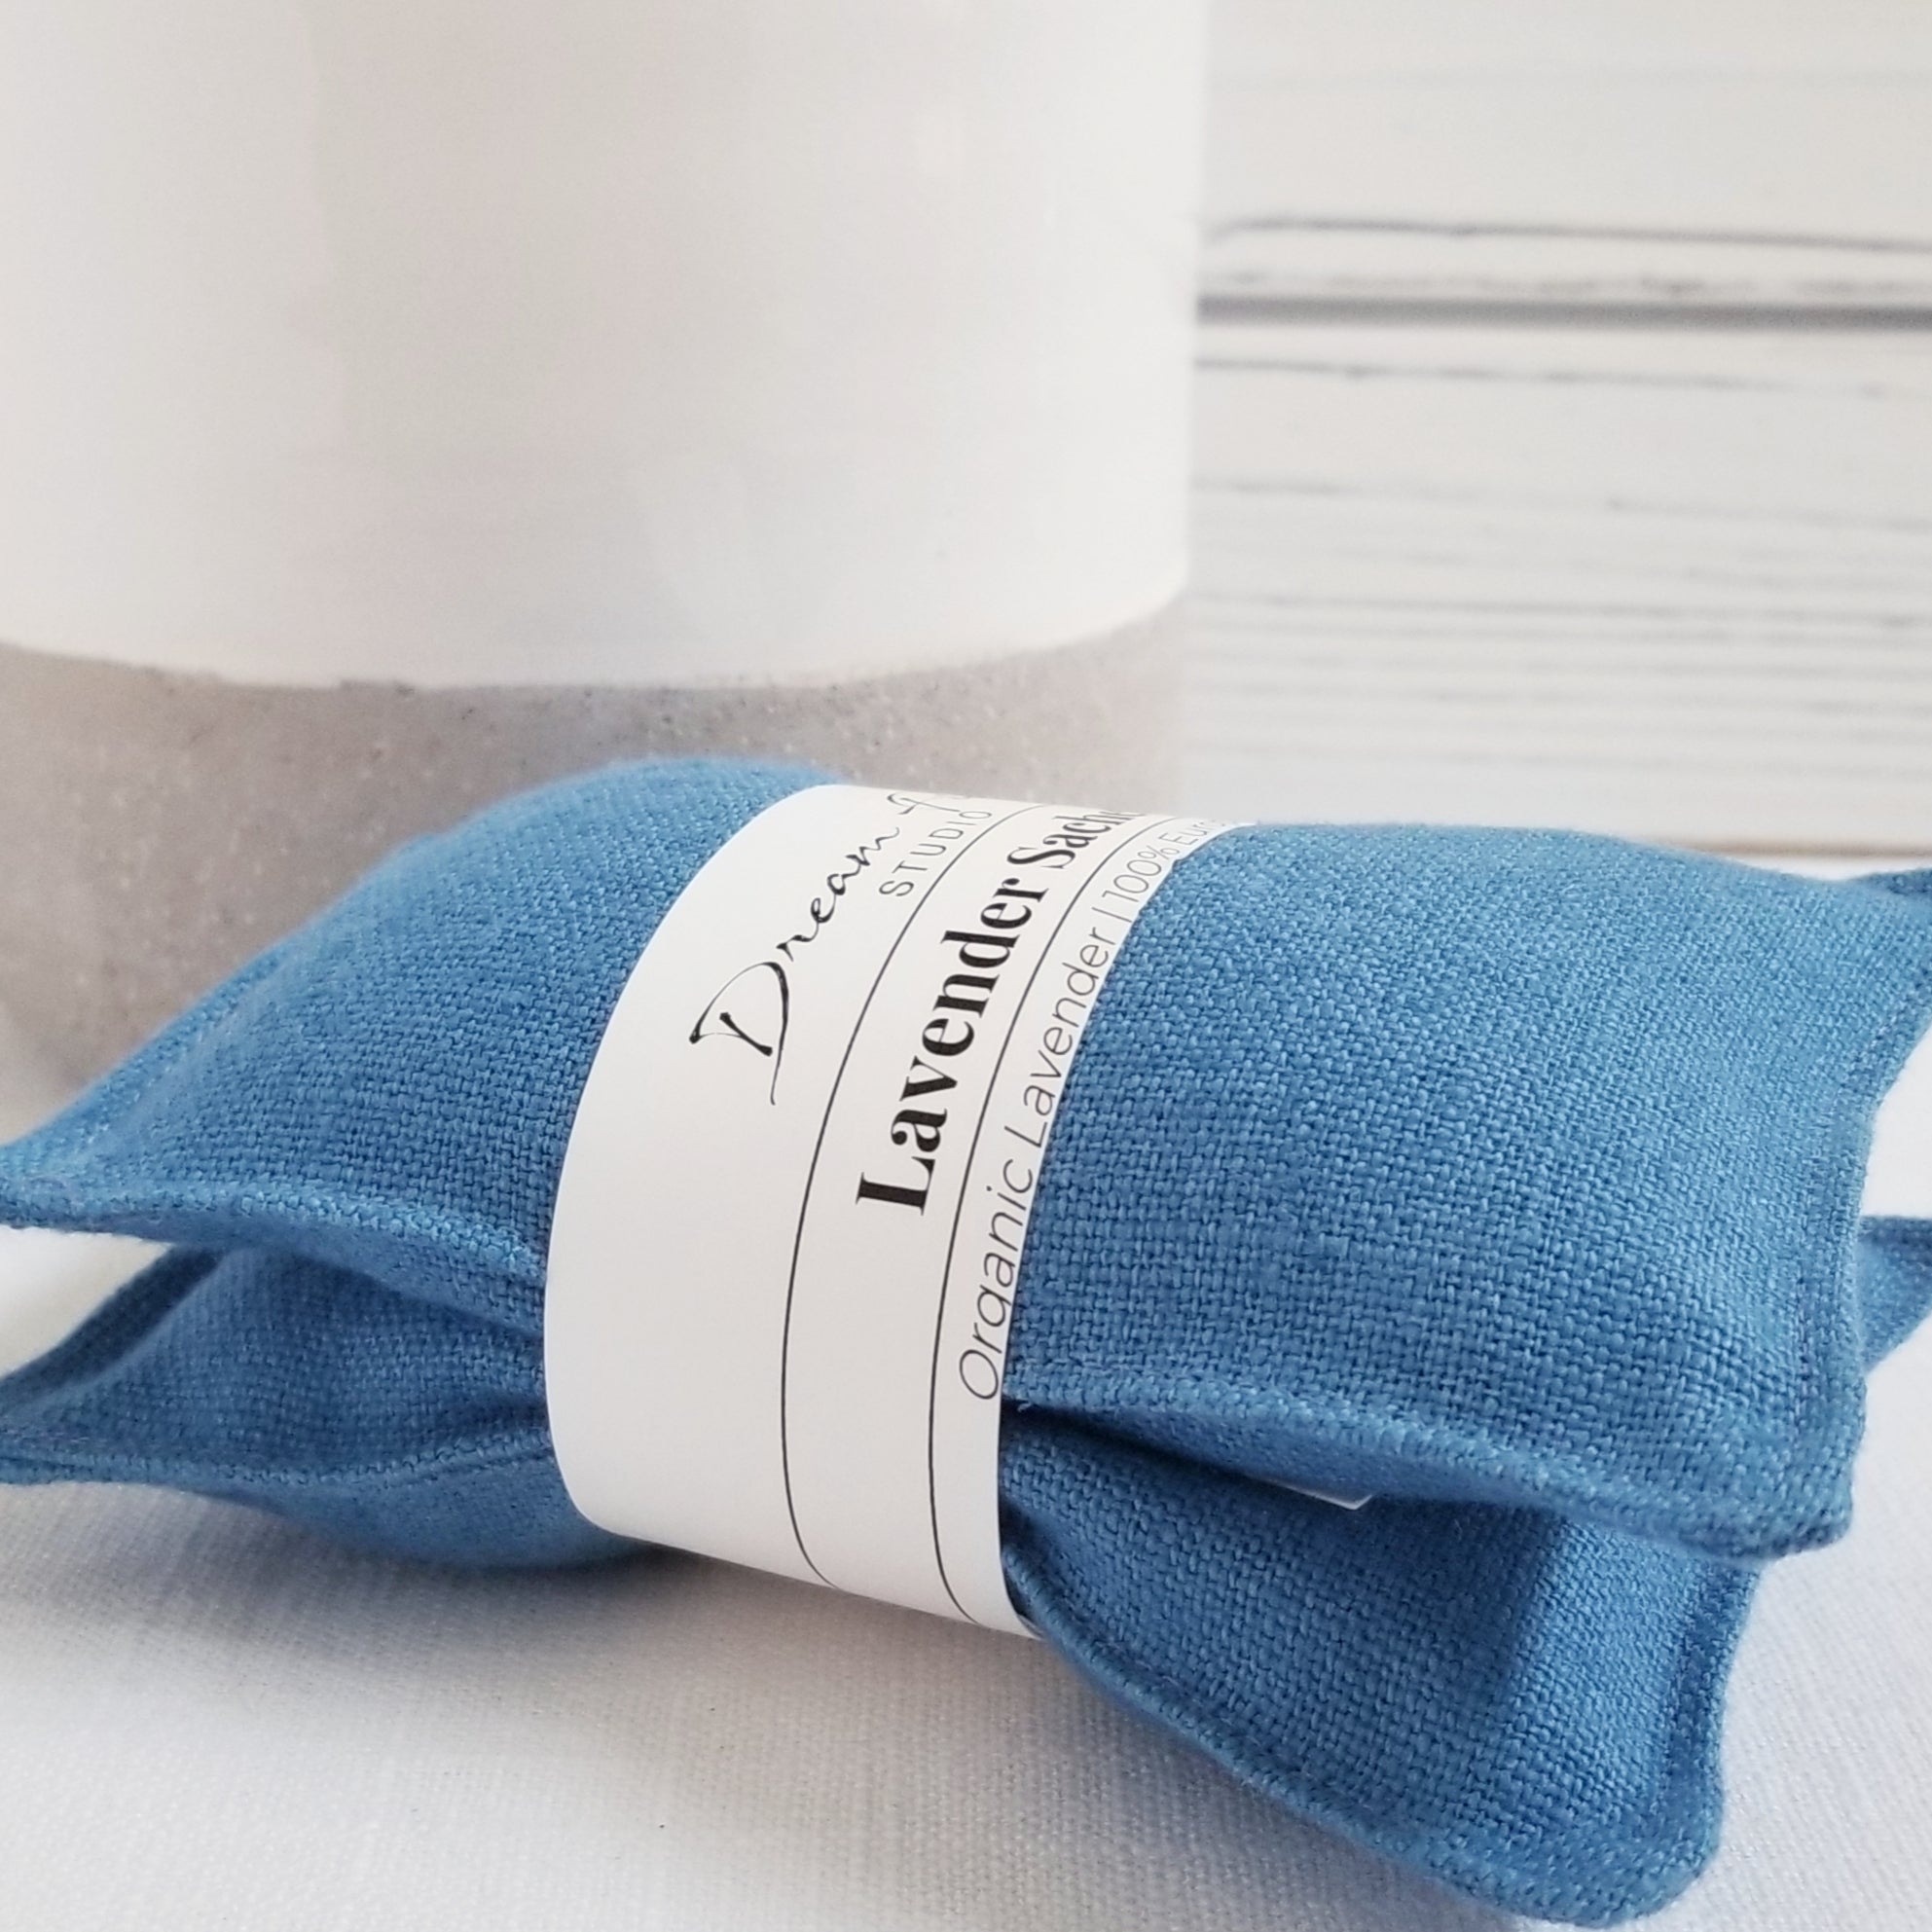 Linen Lavender Sachet Pair With Sustainable Flax and Organic Lavender - Cerulean Blue